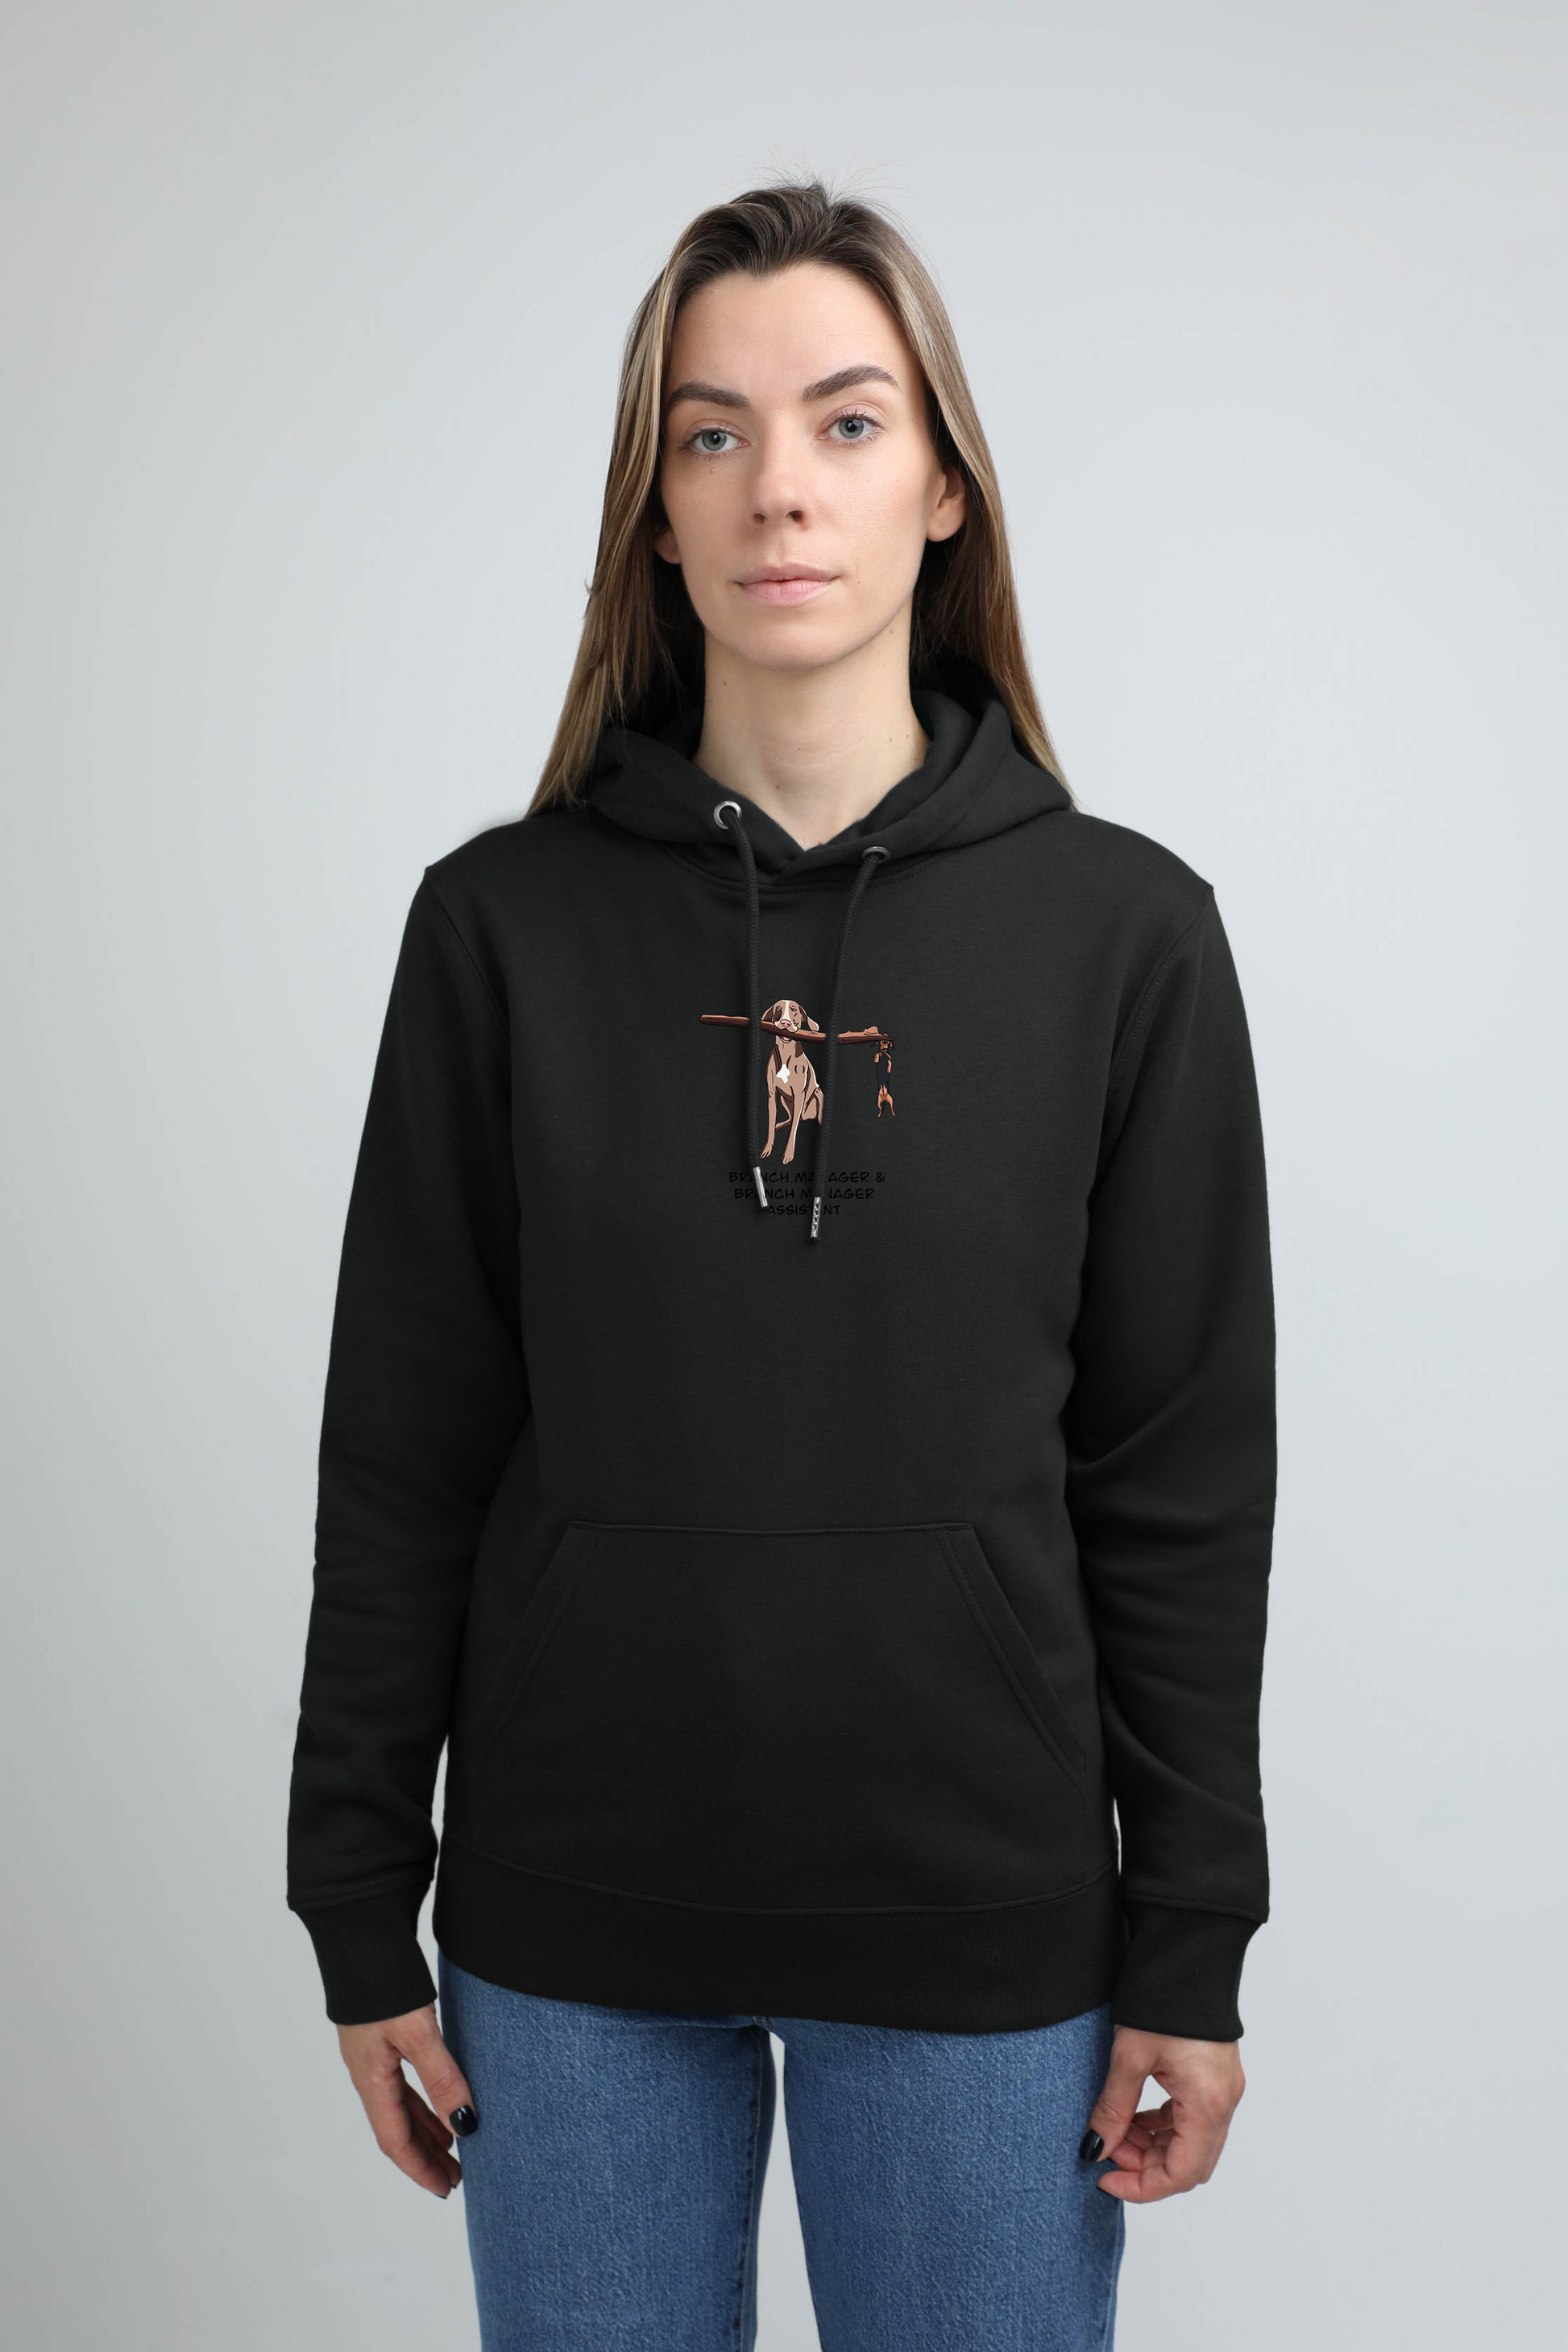 Manager dog | Hoodie with dog. Regular fit | Unisex by My Wild Other